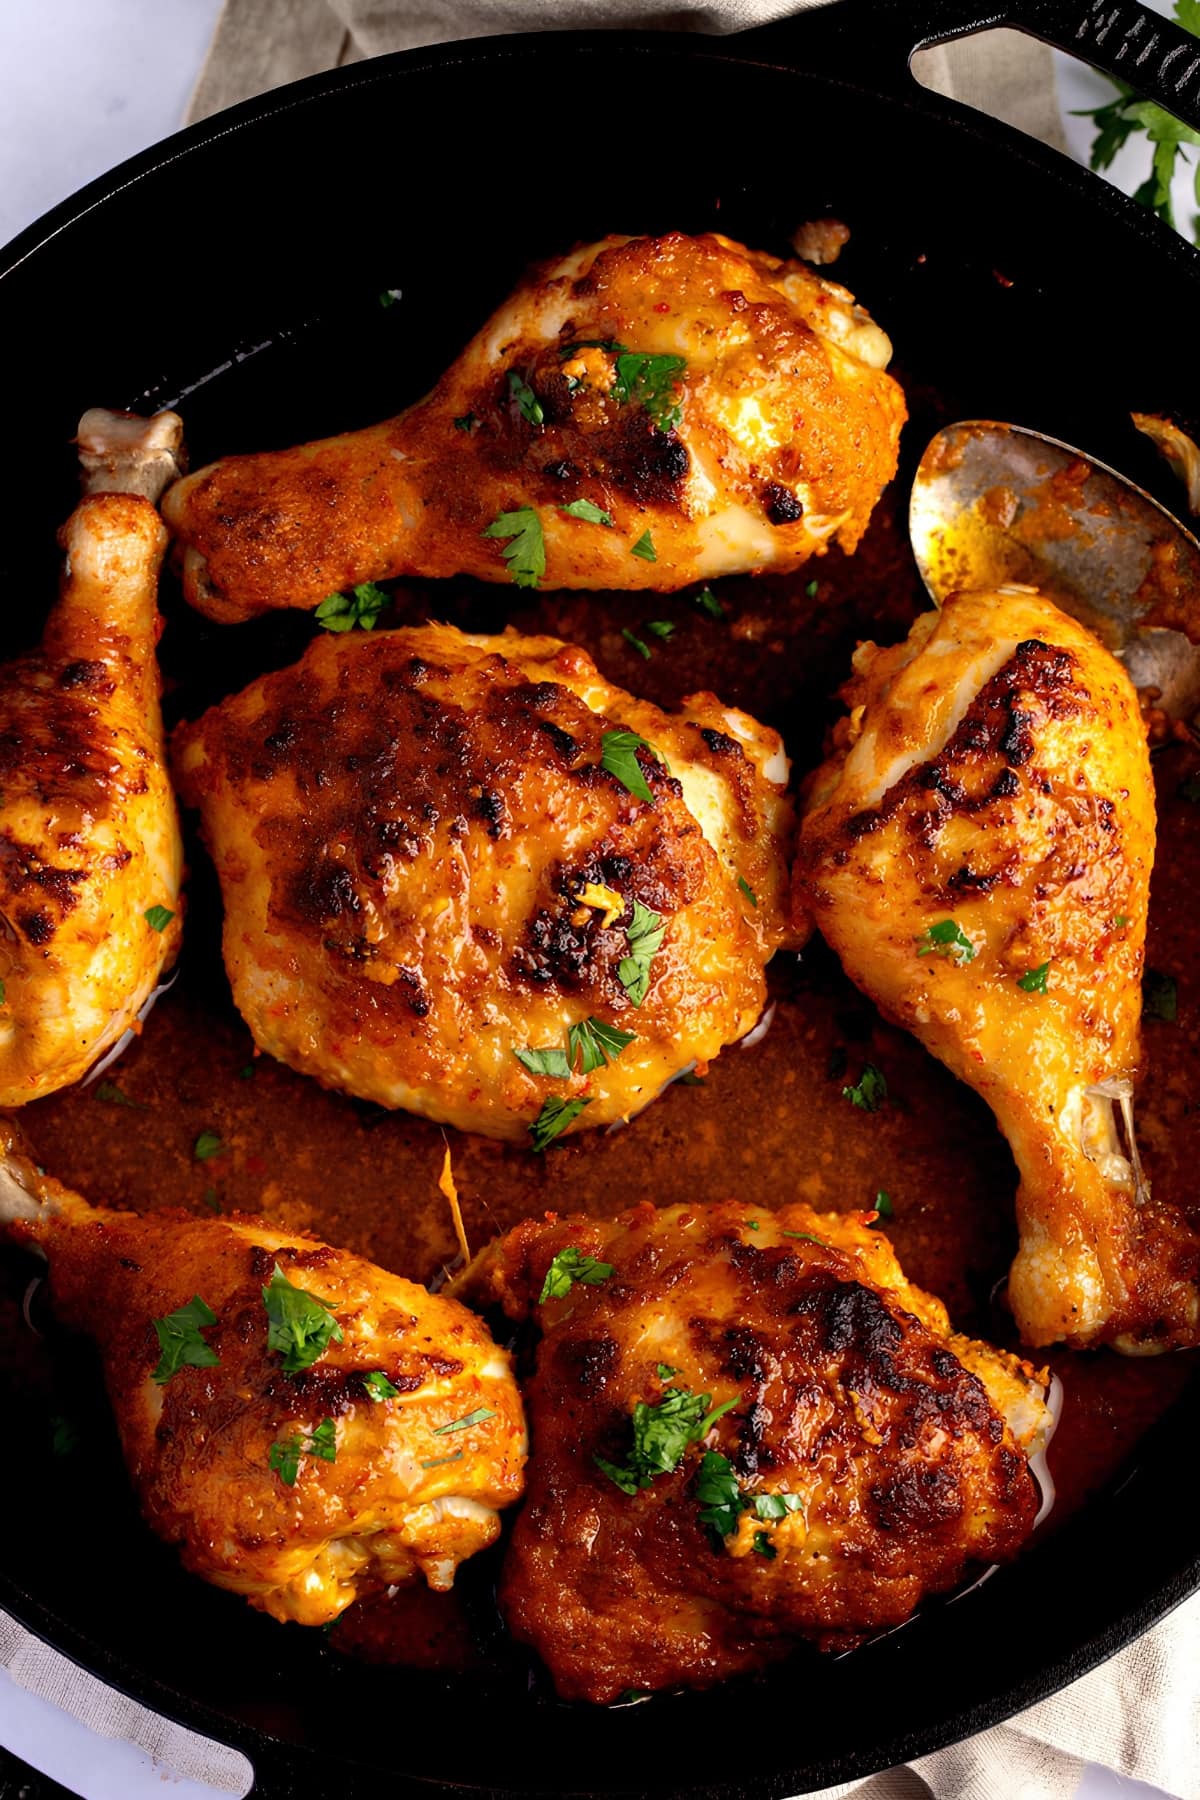 Peri-peri Chicken cooked in a cast iron, top view